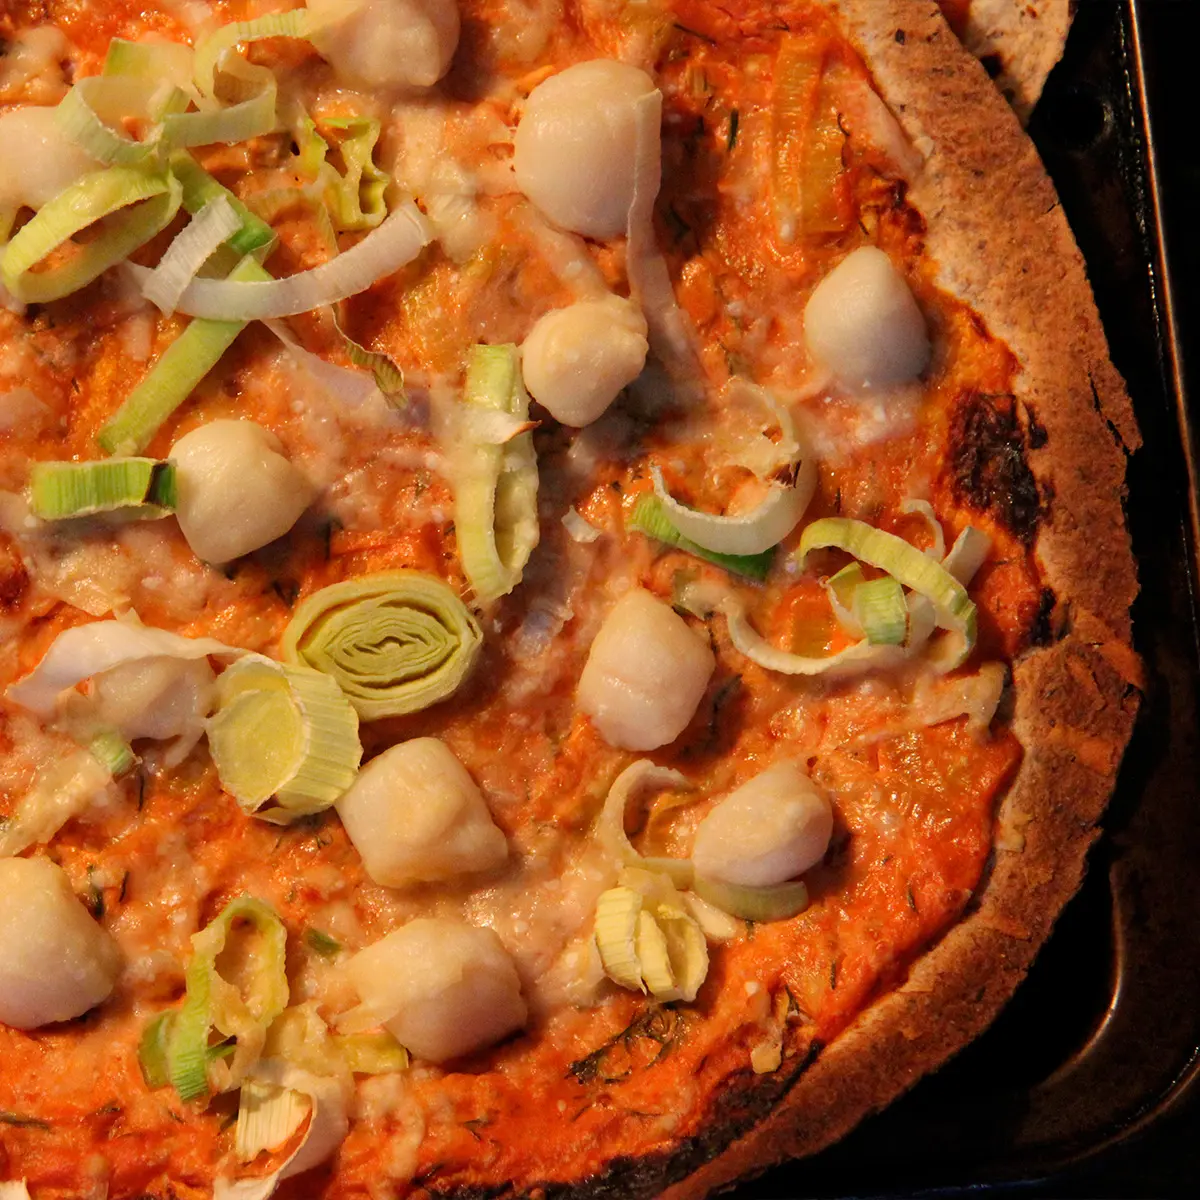 Leeks and scallops thin crust pizza, healthy version